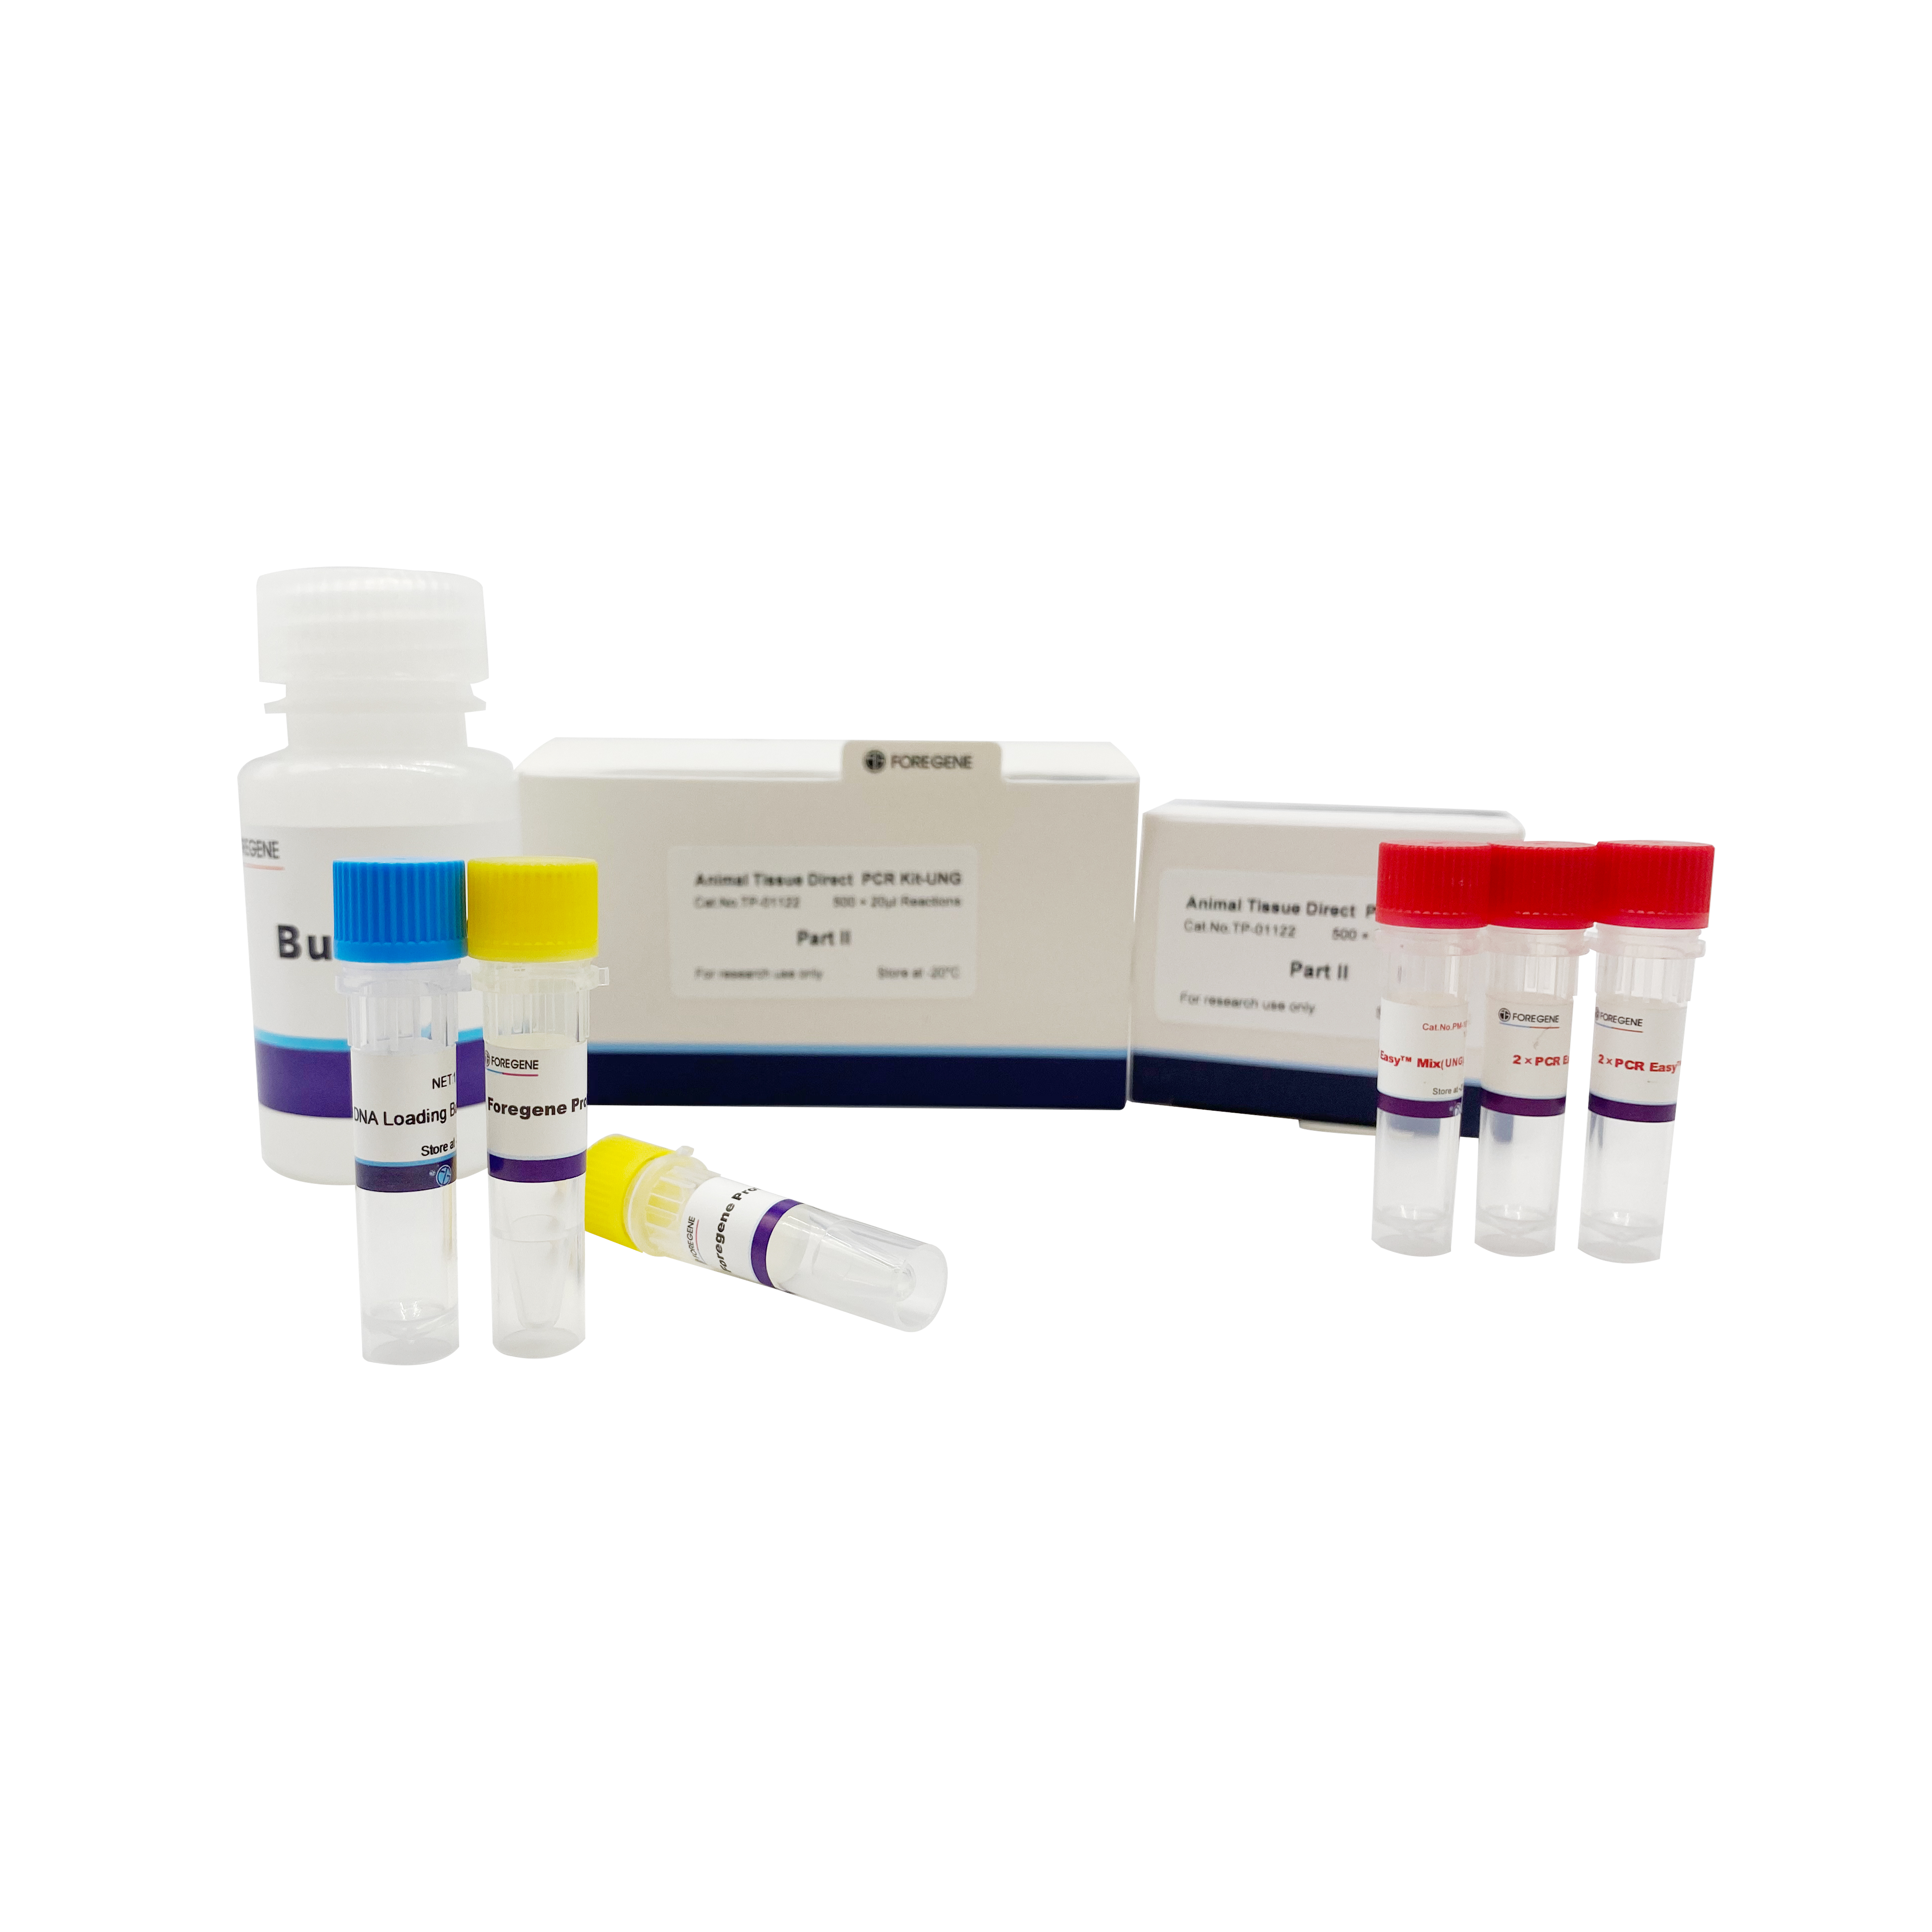 Animal Tissue Direct PCR Kit-UNG(Without DNA Extraction)